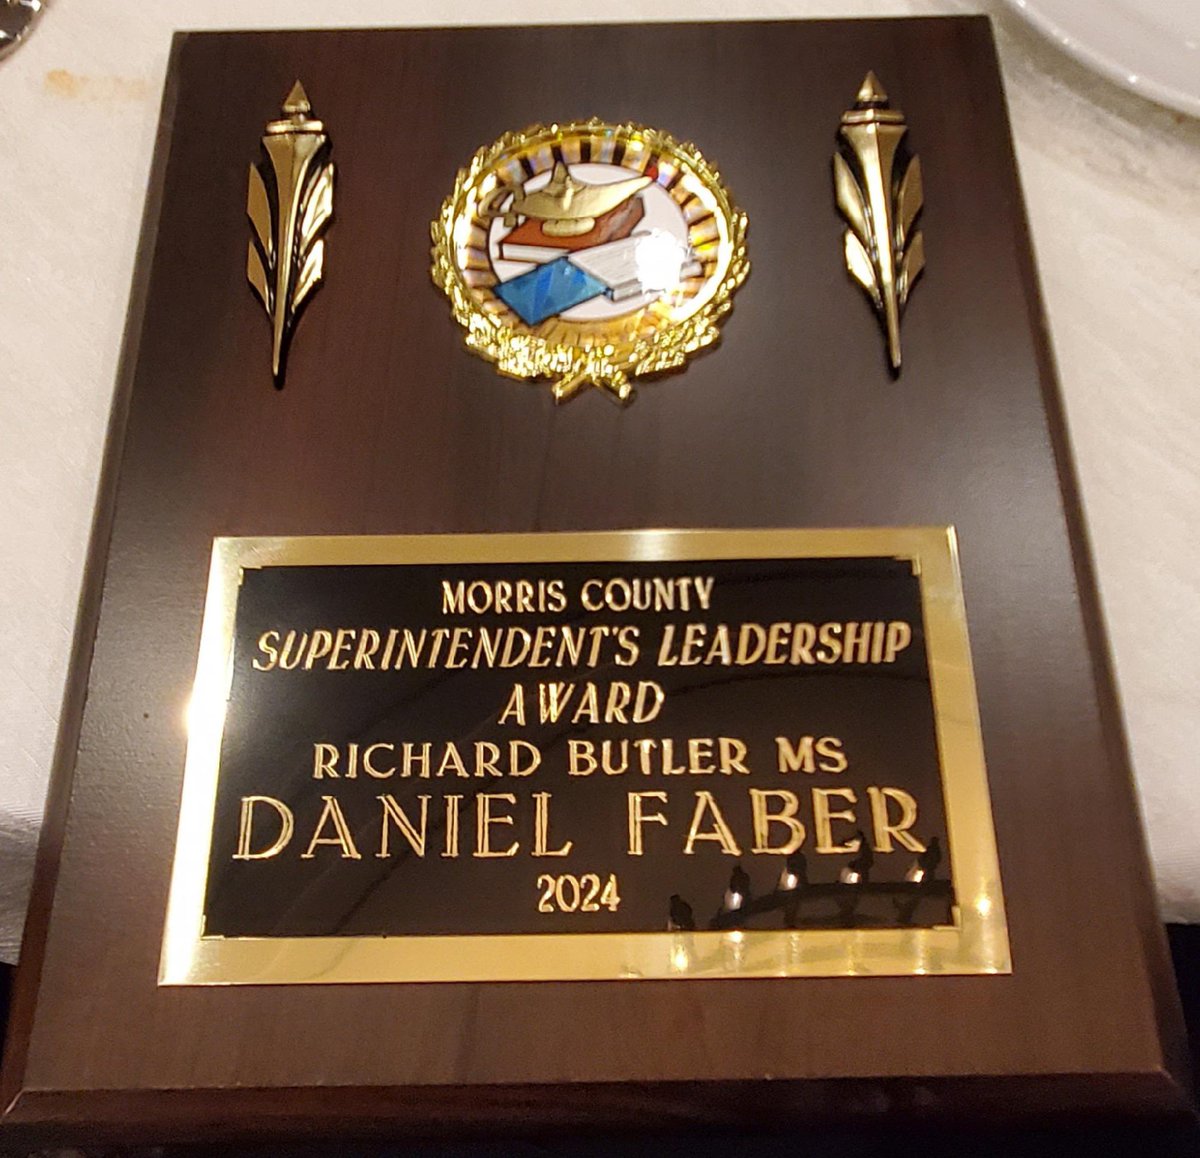 Daniel Faber is the worthy recipient of the Morris County Leadership Award given each year to one RBS 8th grader. Congratulations to Daniel for representing the Richard Butler Middle School Class of 2024! @mcaemsa